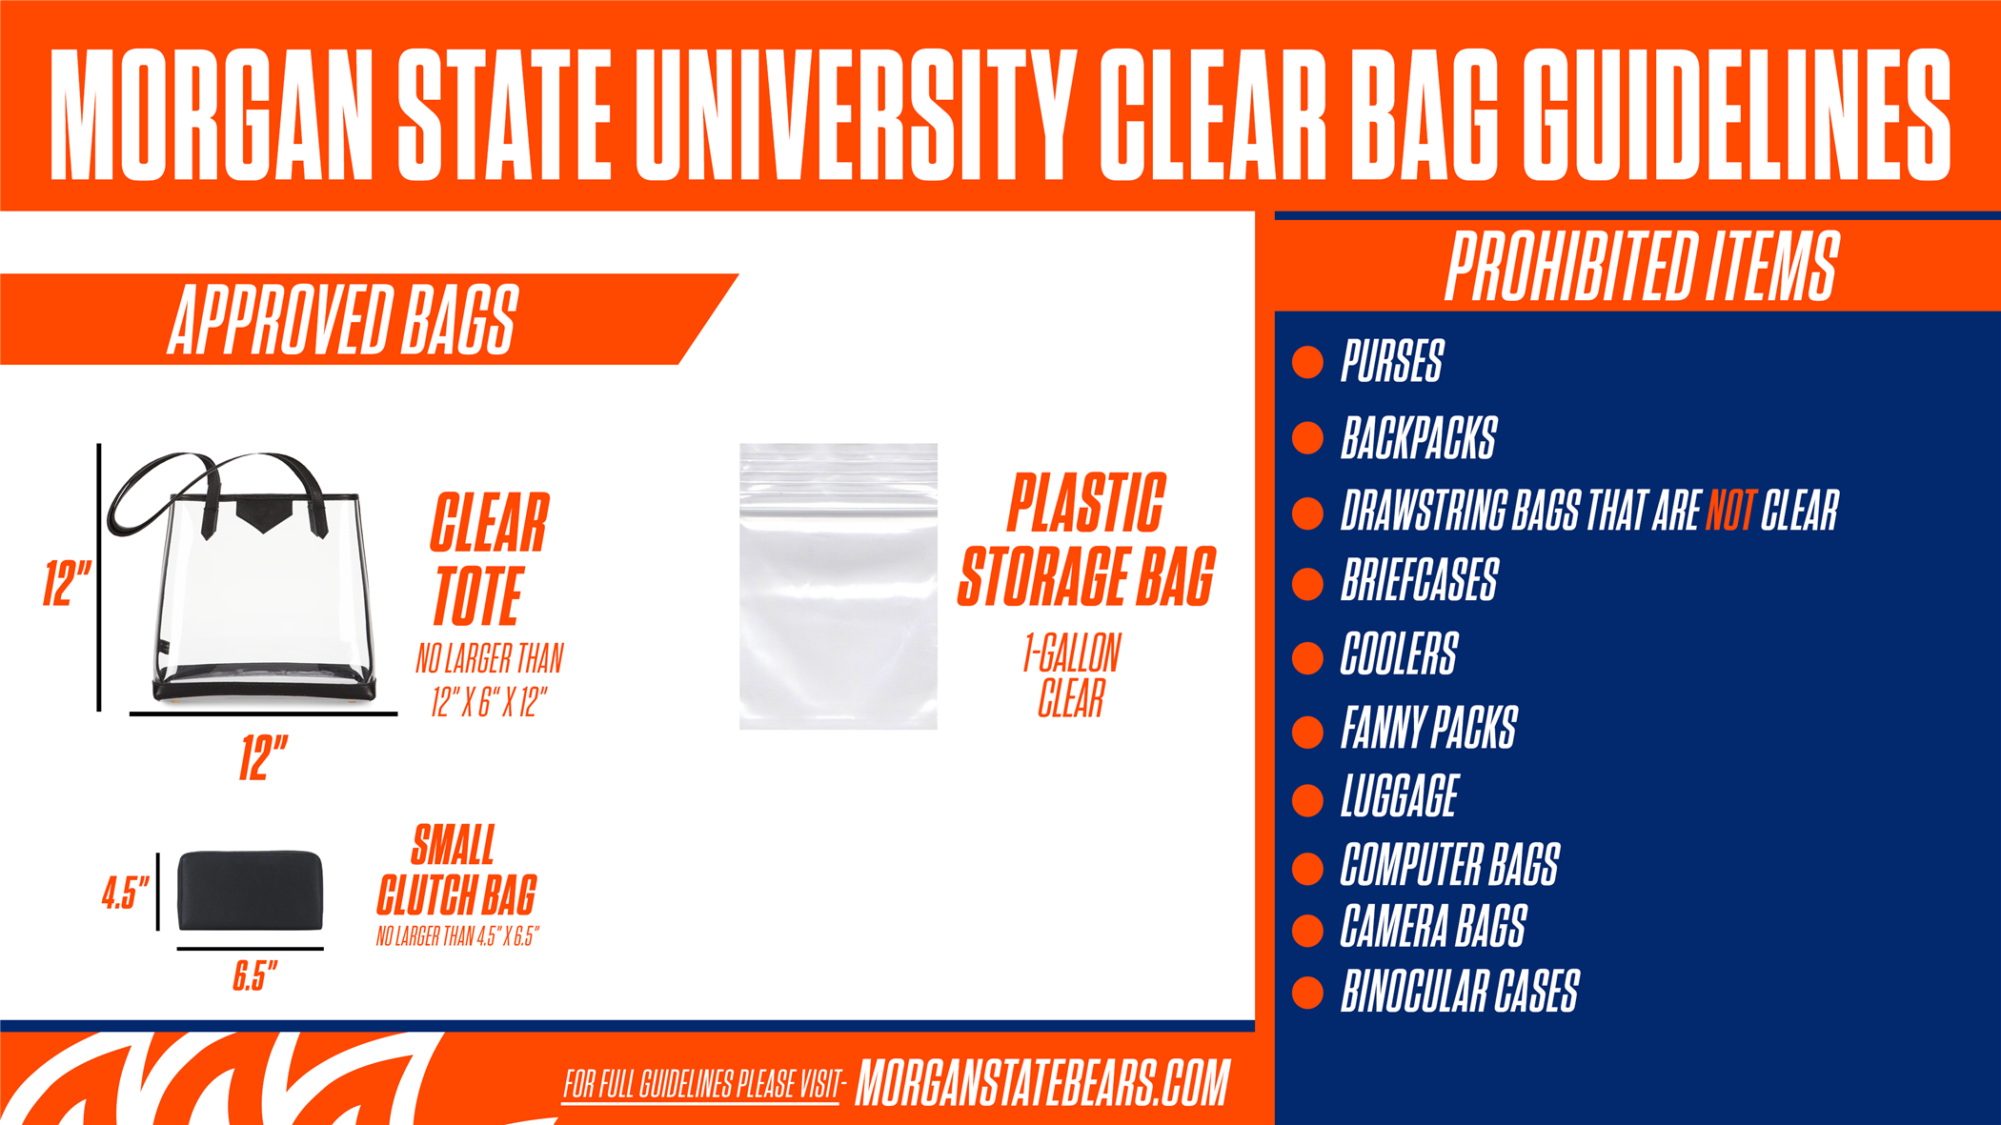 New clear bag policy coming to Memorial Stadium - MSU Athletics